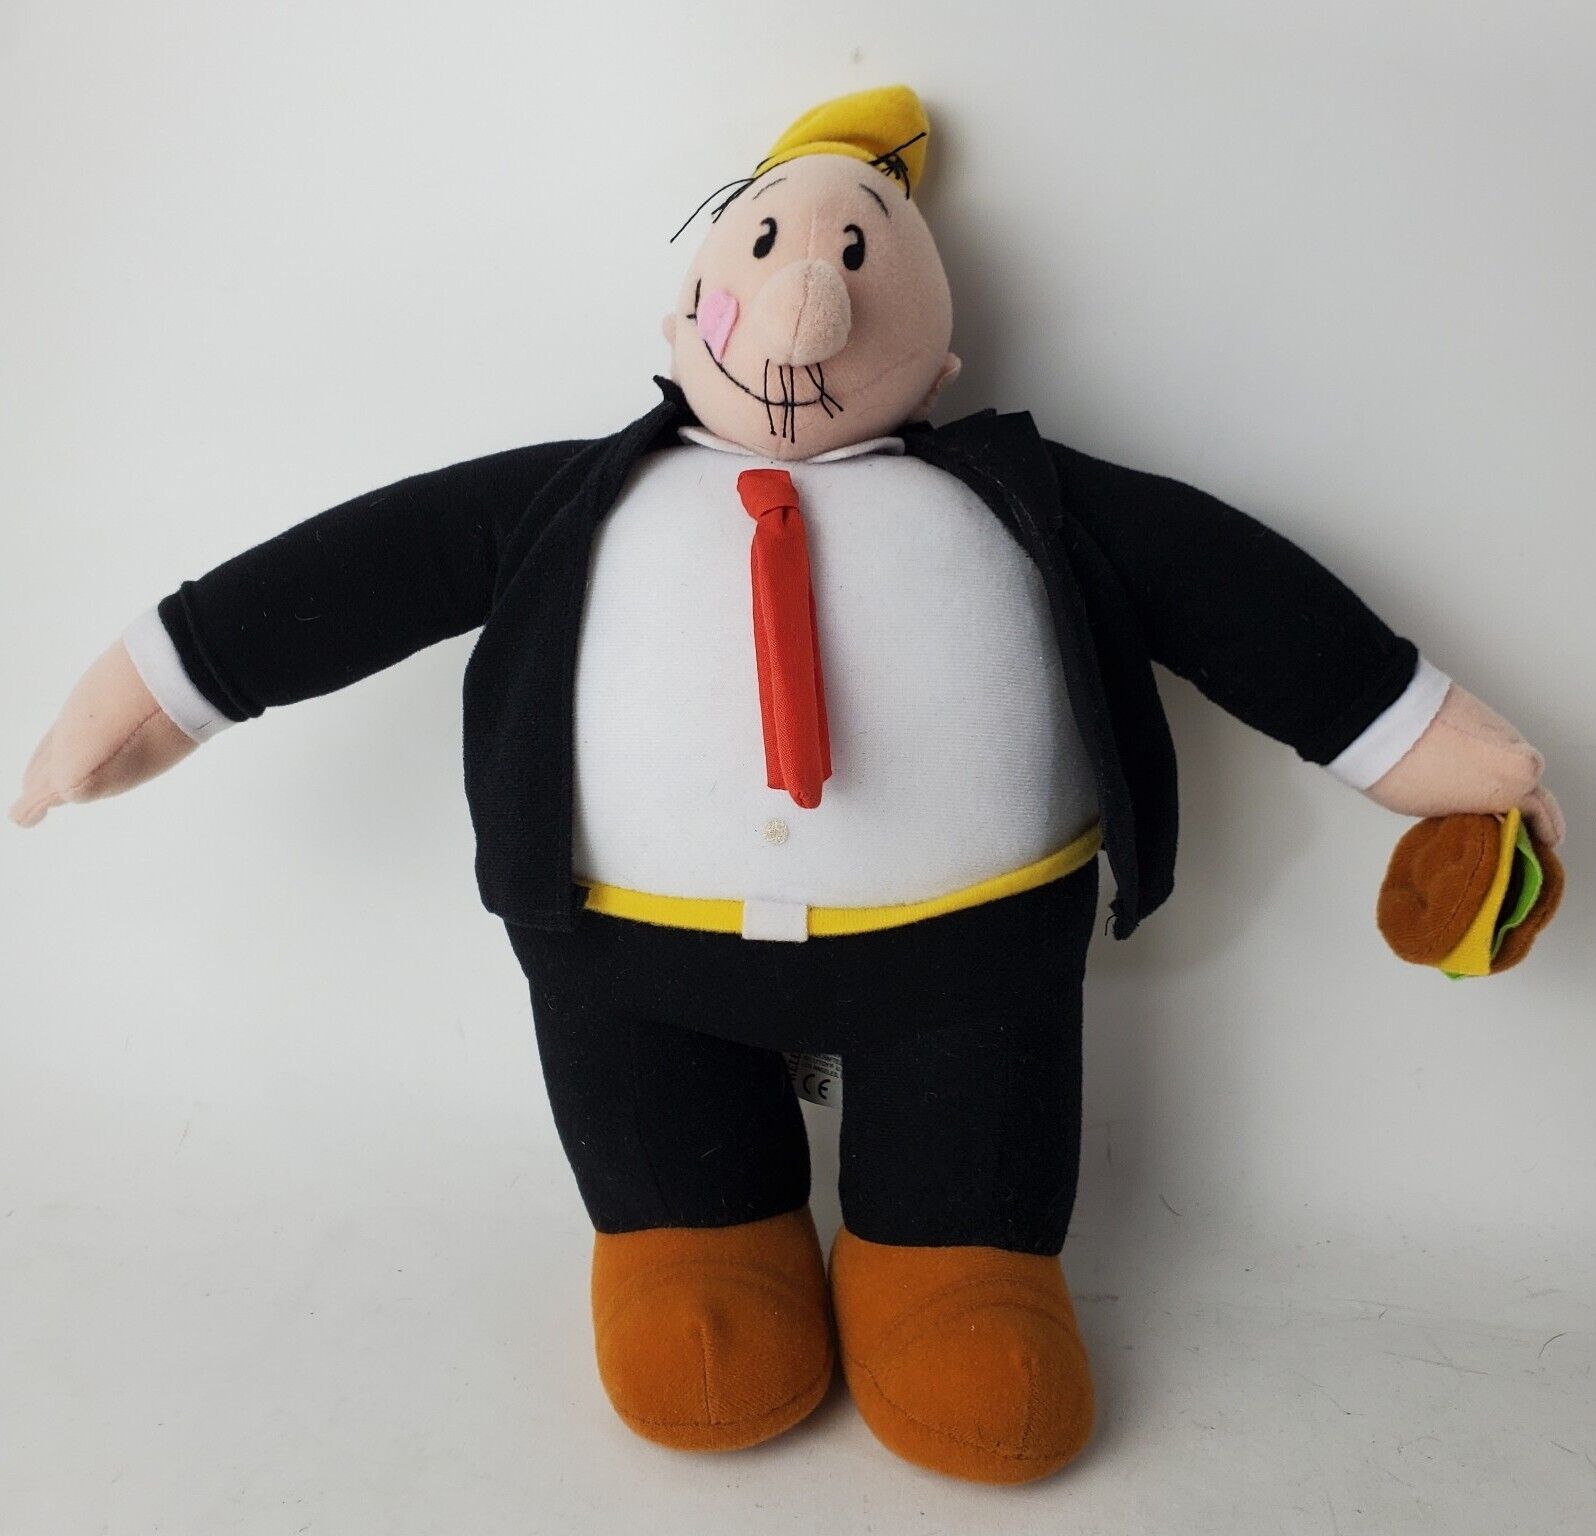 Wimpy Plush Vintage 2002 Popeye Kelly Toys Poseable Wire Frame 12 Inches Tall